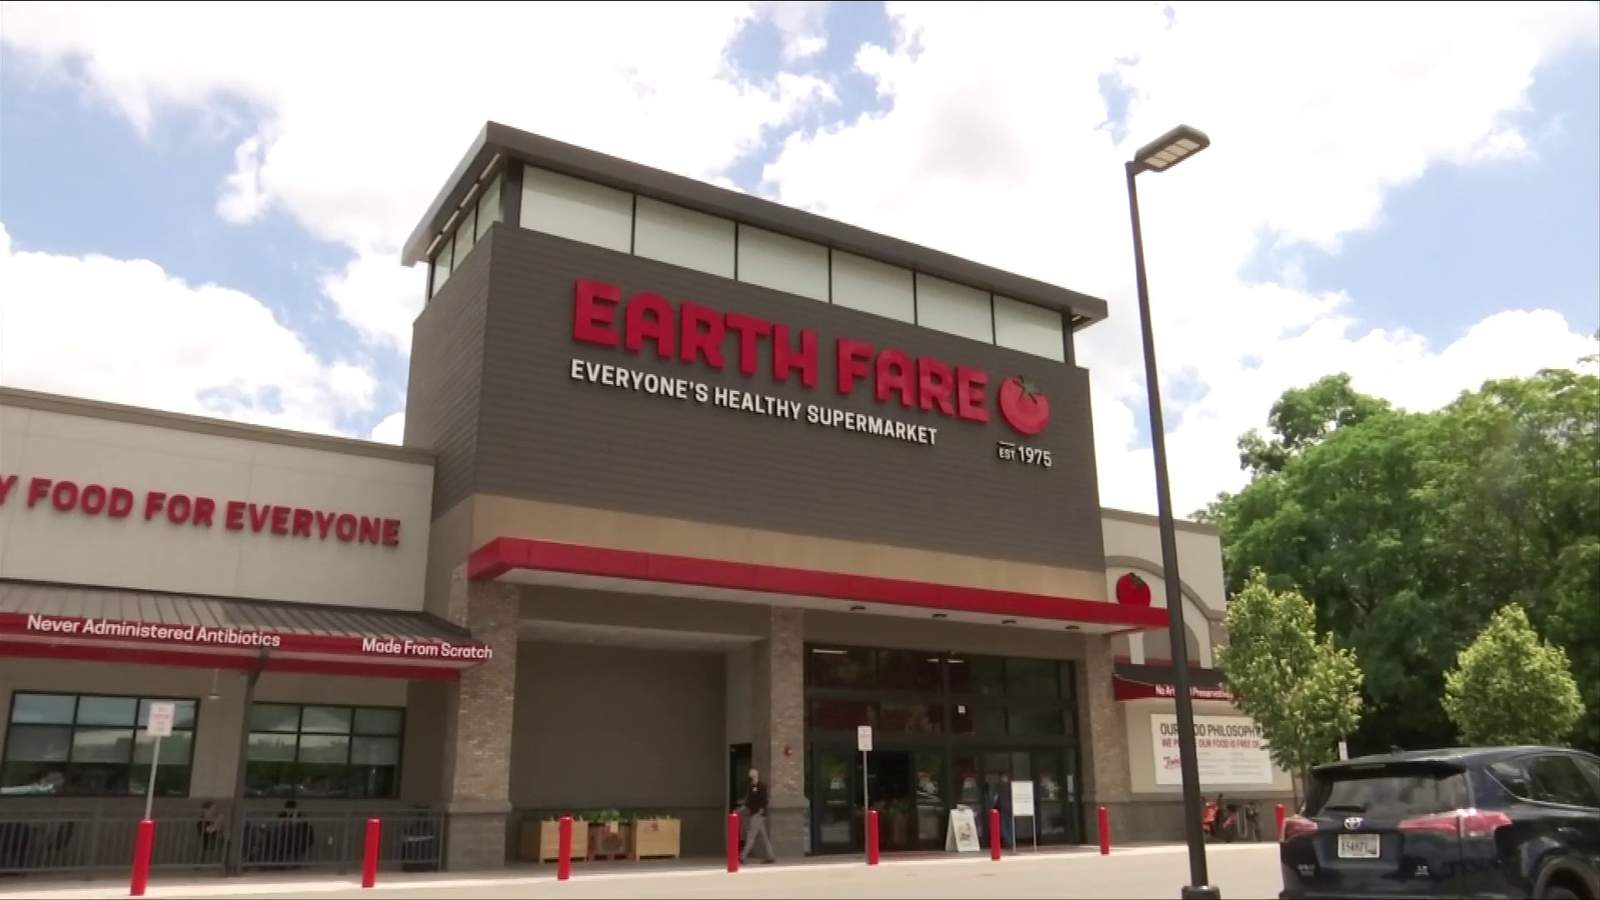 Earth Fare reopens in Roanoke under new ownership